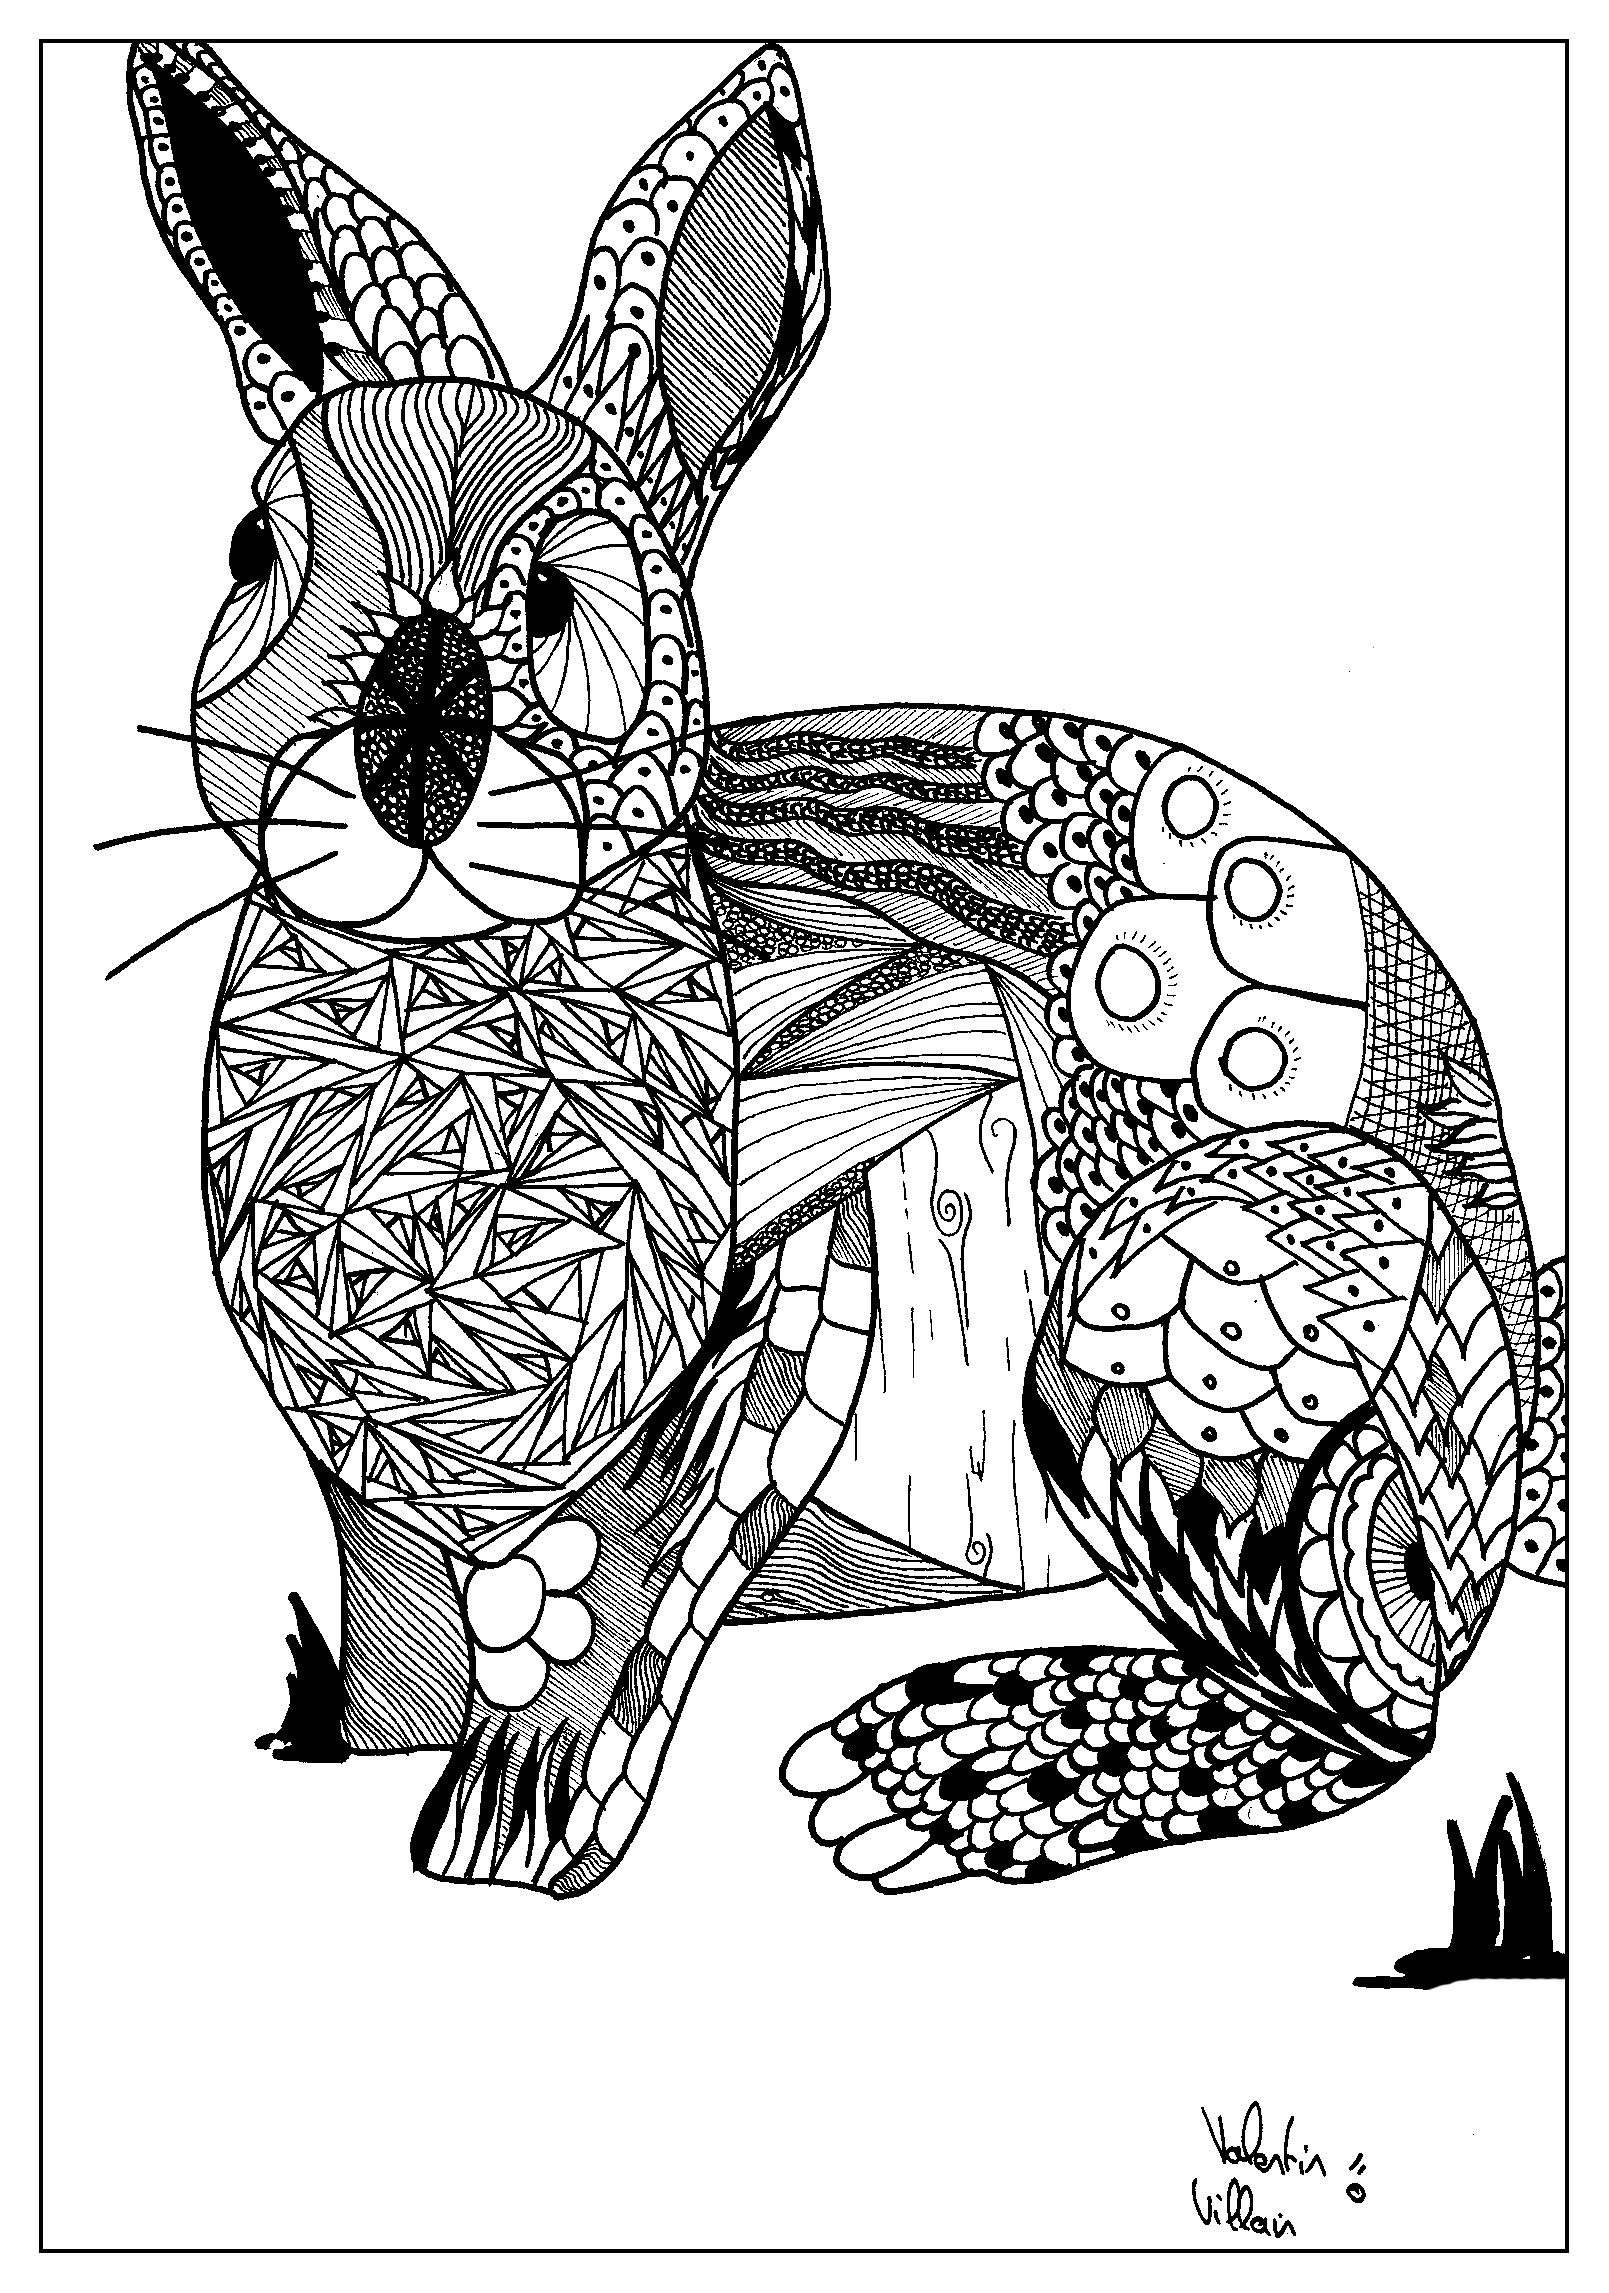 image=events easter coloring page adult Coloring paque by valentin 1